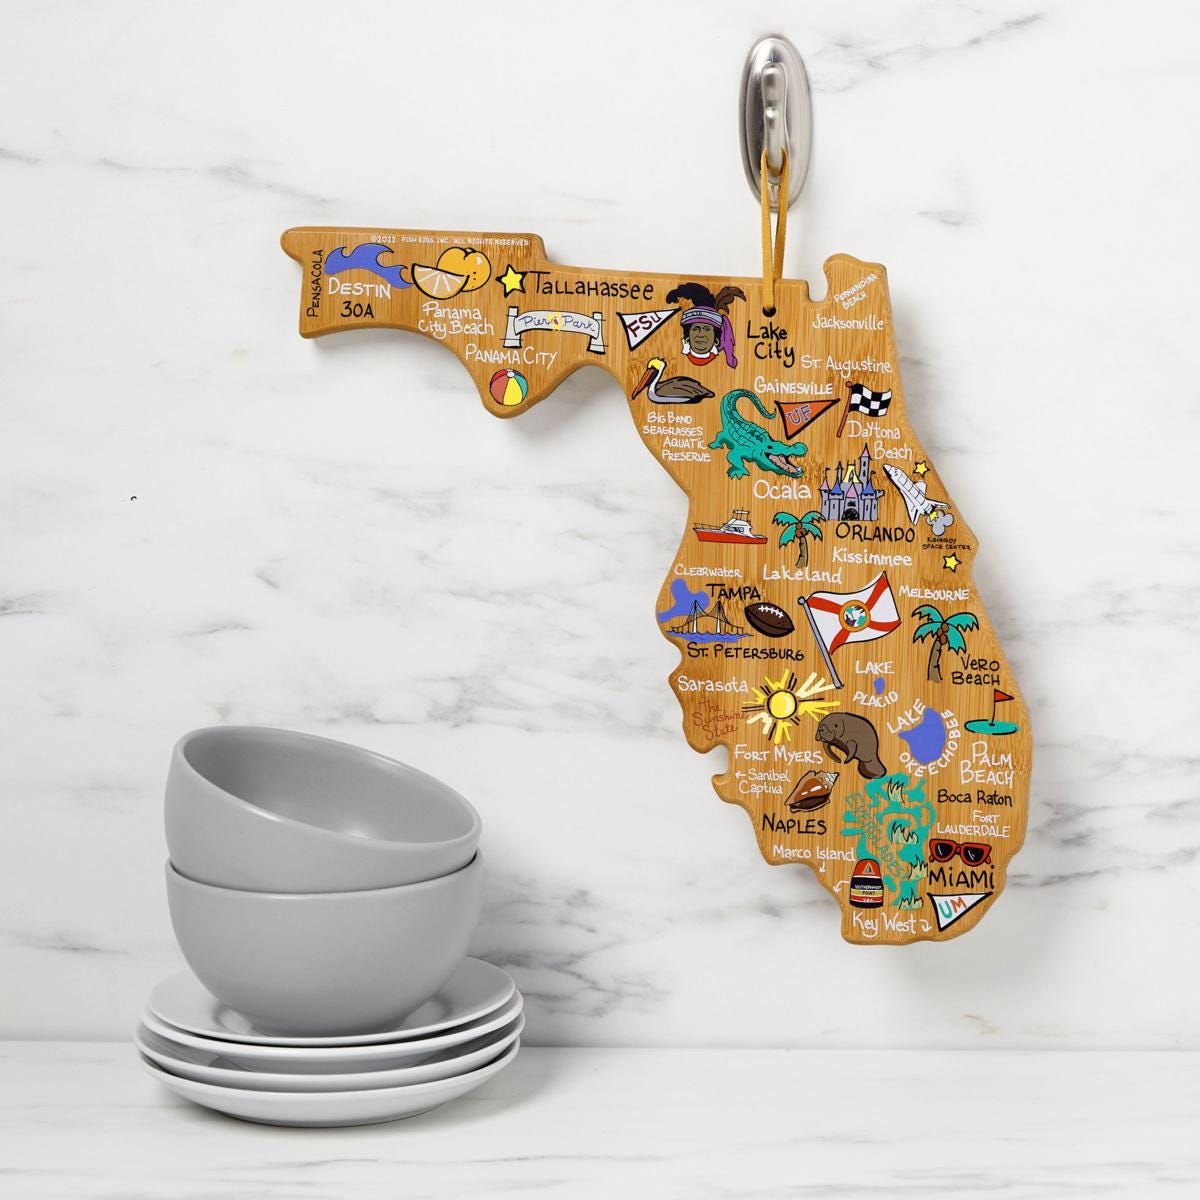 A Florida-shaped souvenir key holder with colorful illustrations and a set of four stacked gray bowls on white saucers.